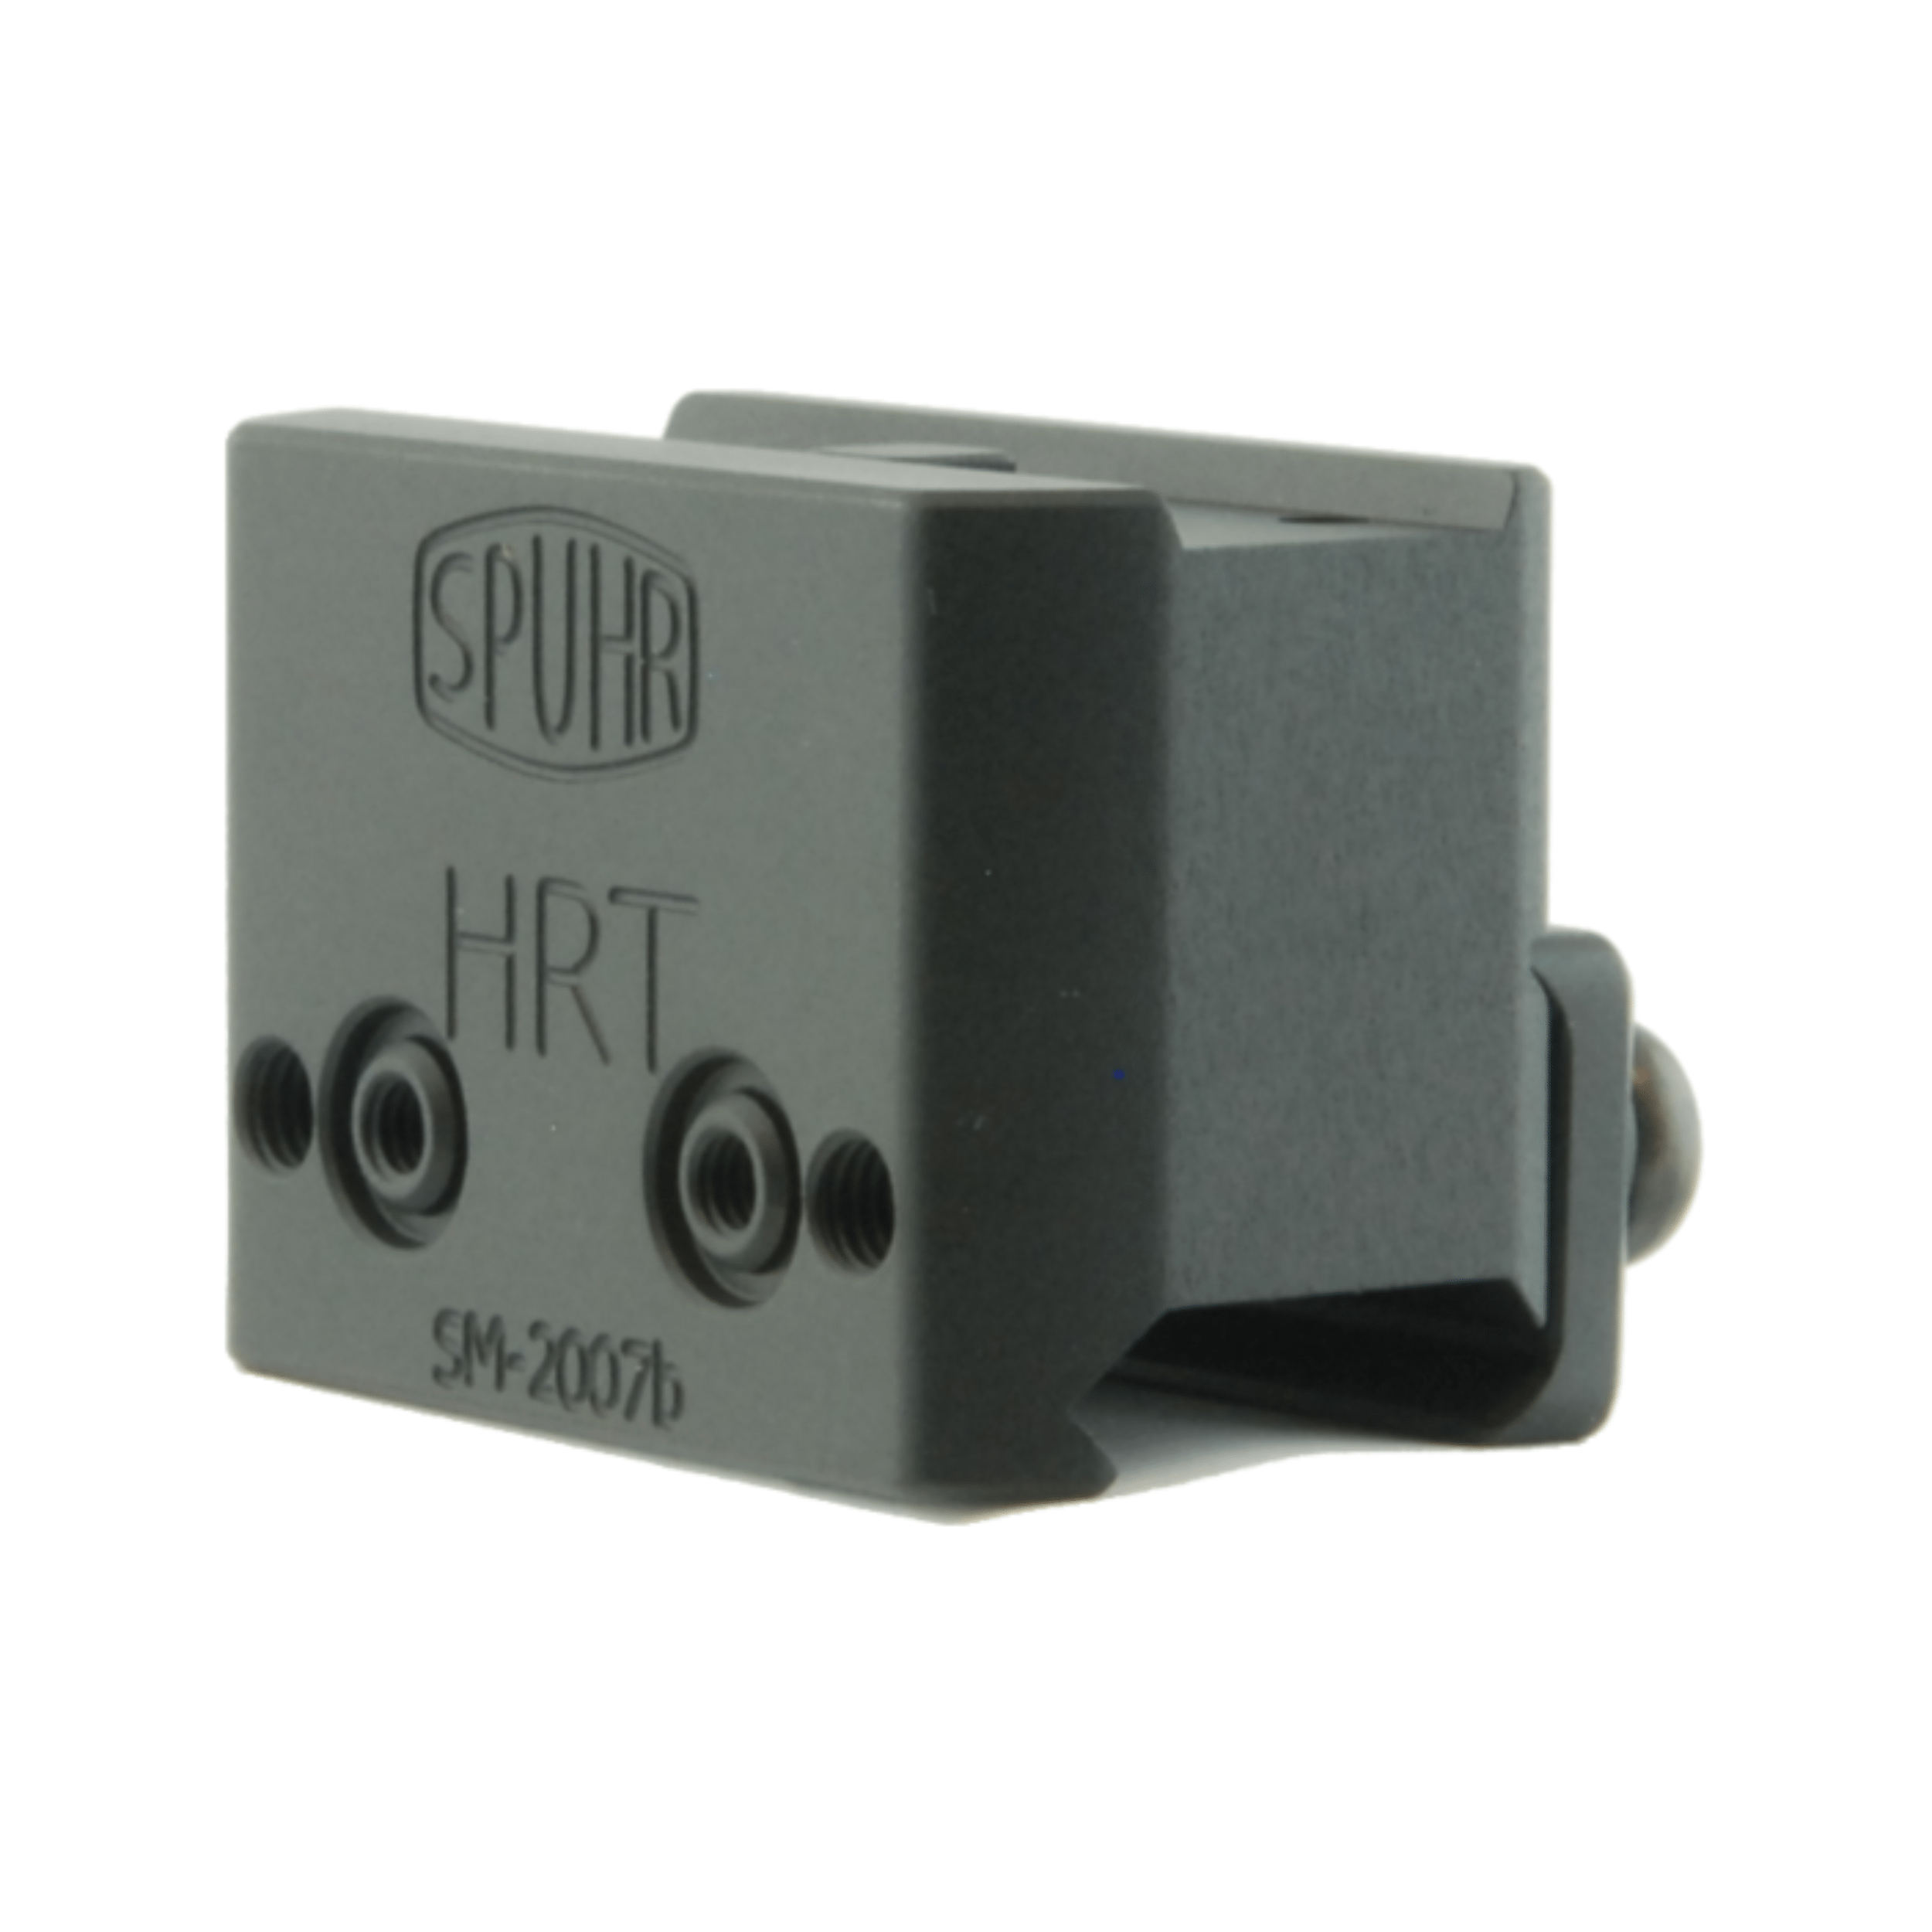 Spuhr spacer for Aimpoint H41mm